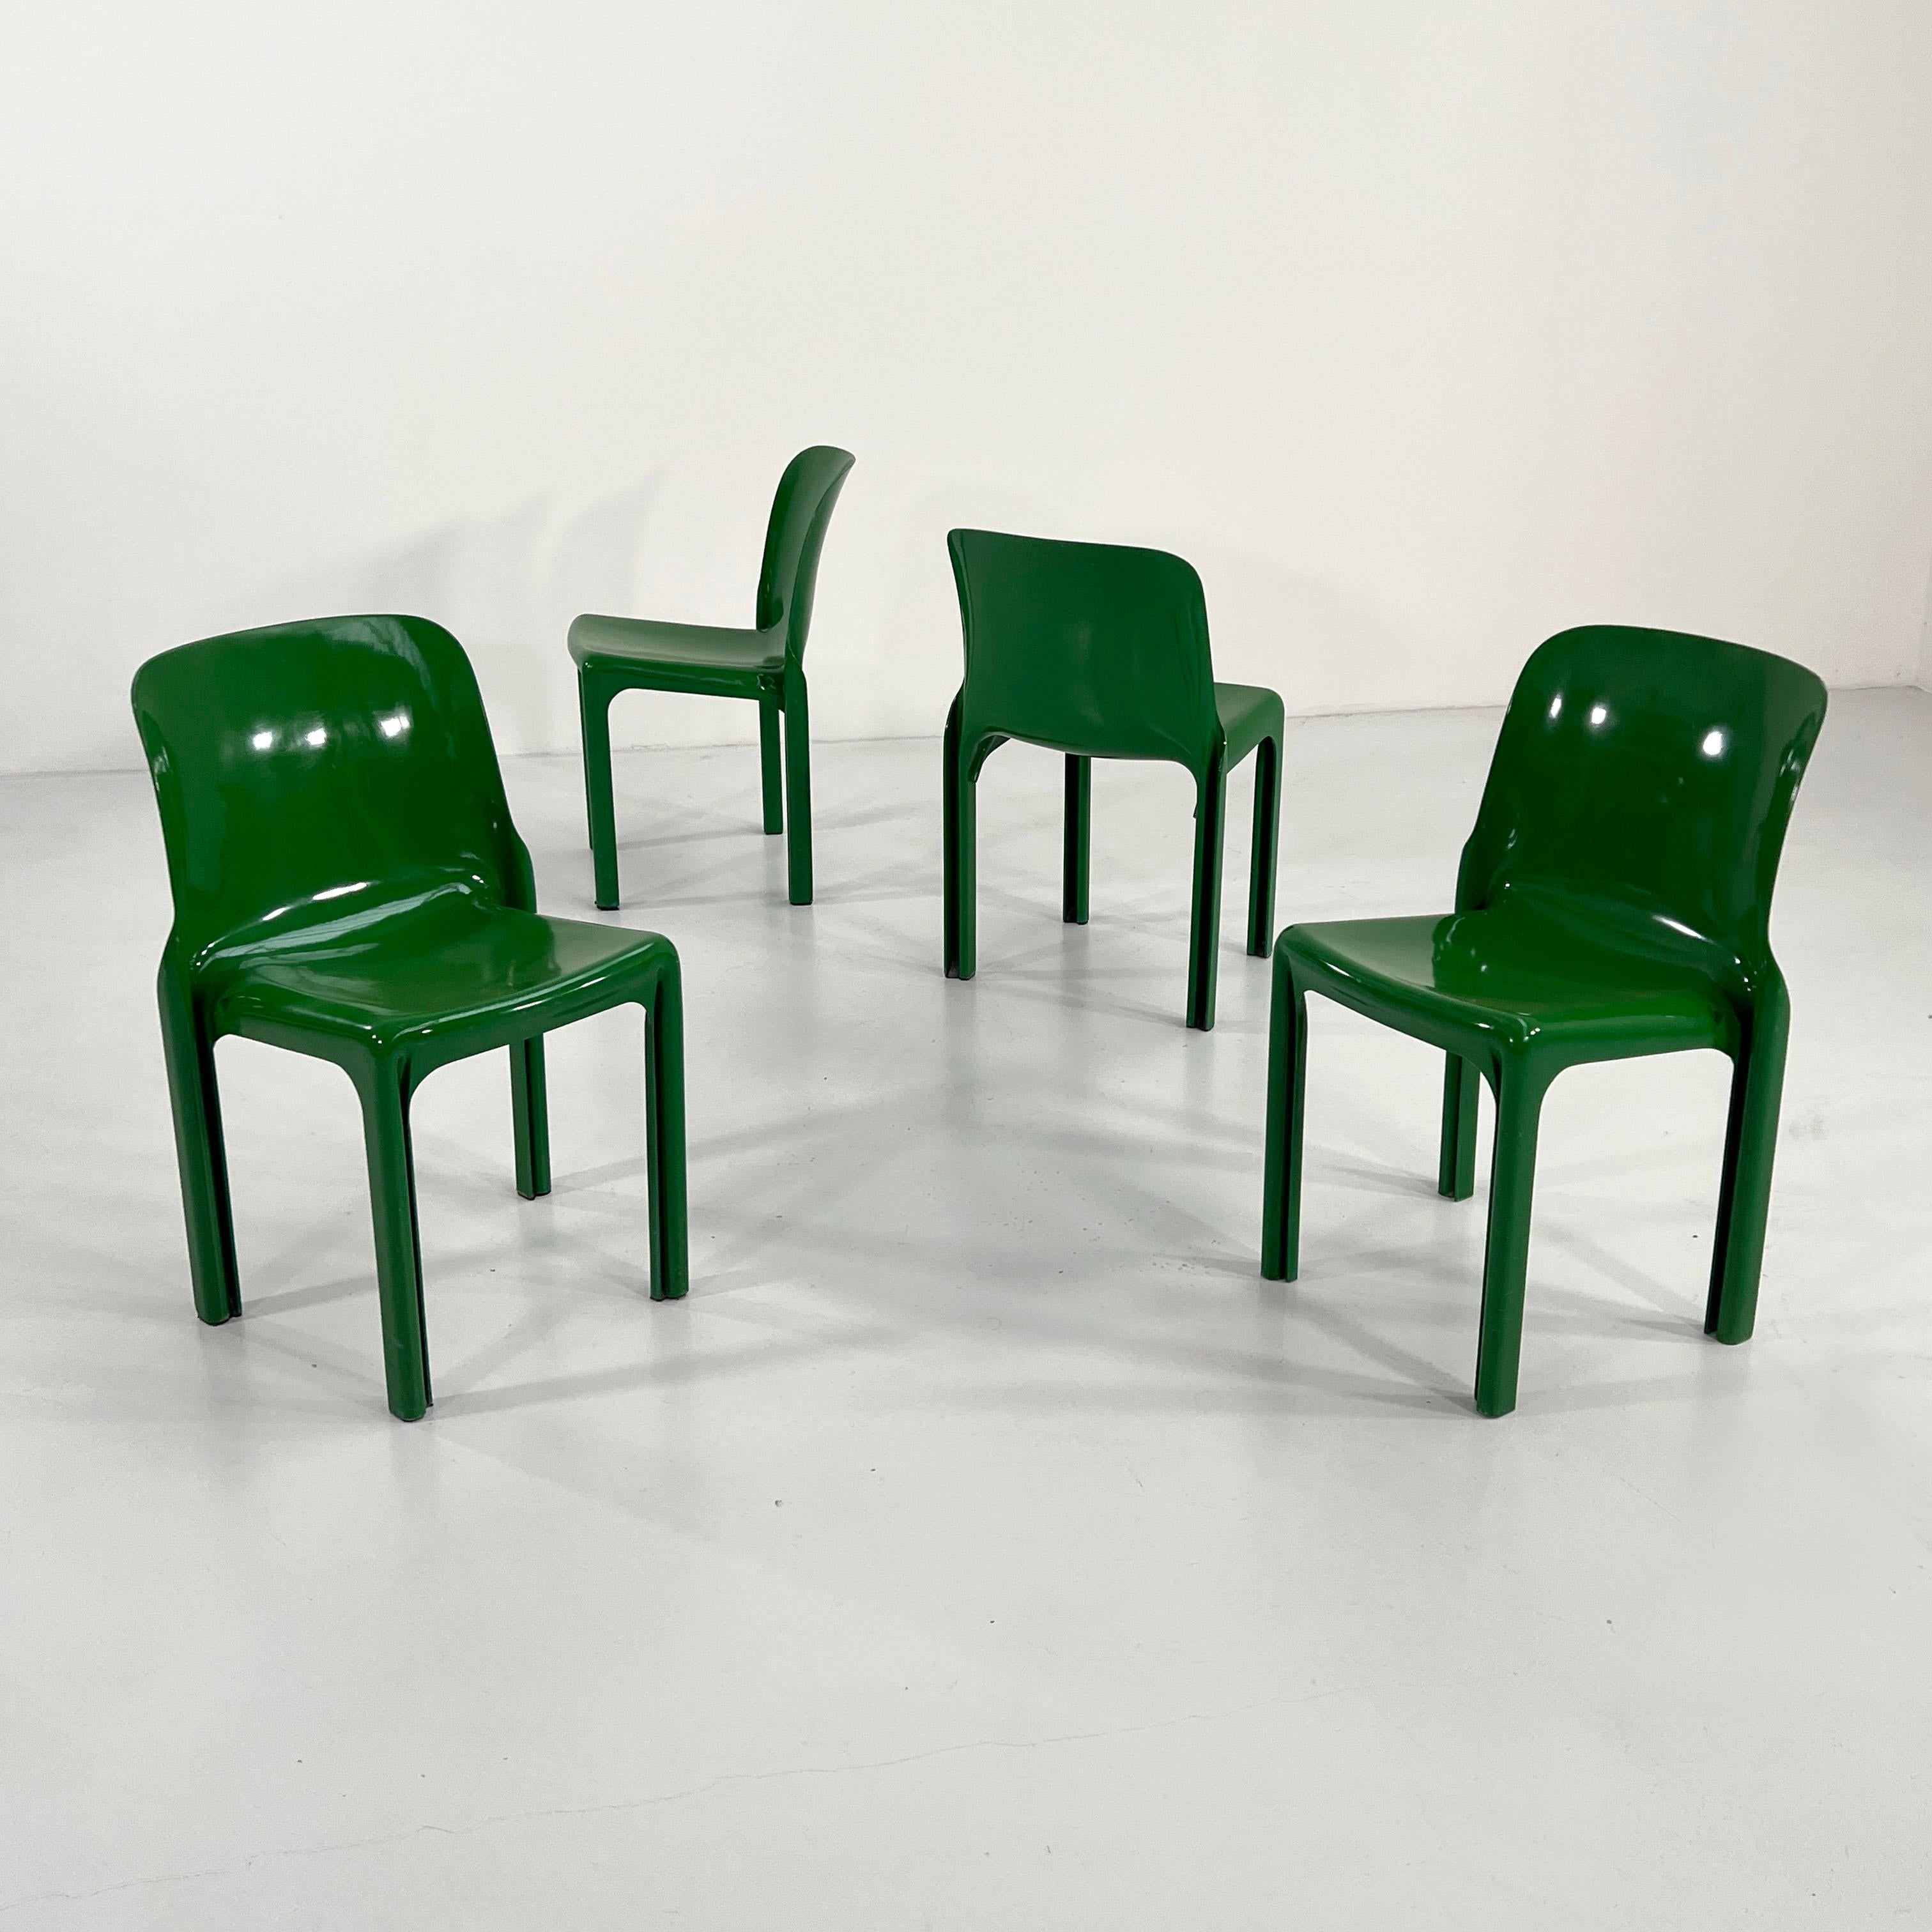 Italian Set of 4 Green Selene Chairs by Vico Magistretti for Artemide, 1970s